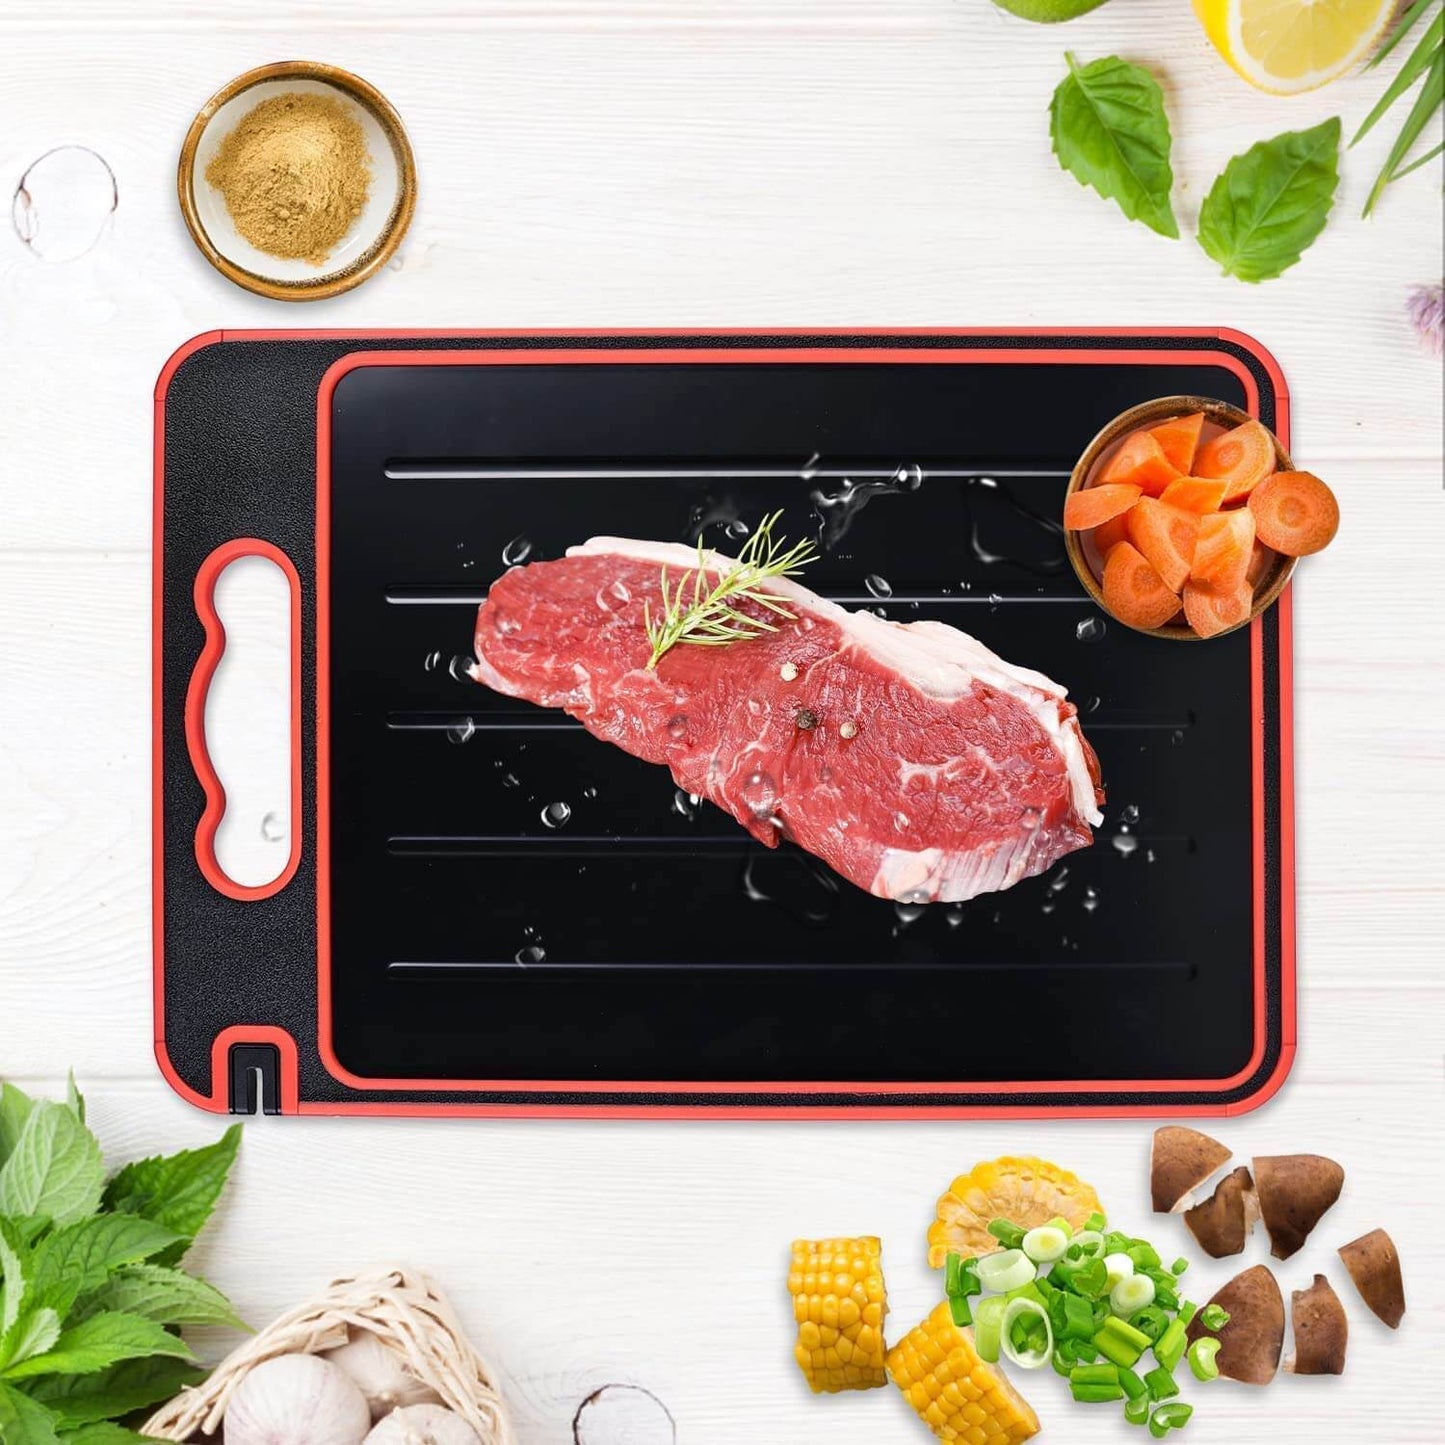 Double-sided cutting board with defrosting function